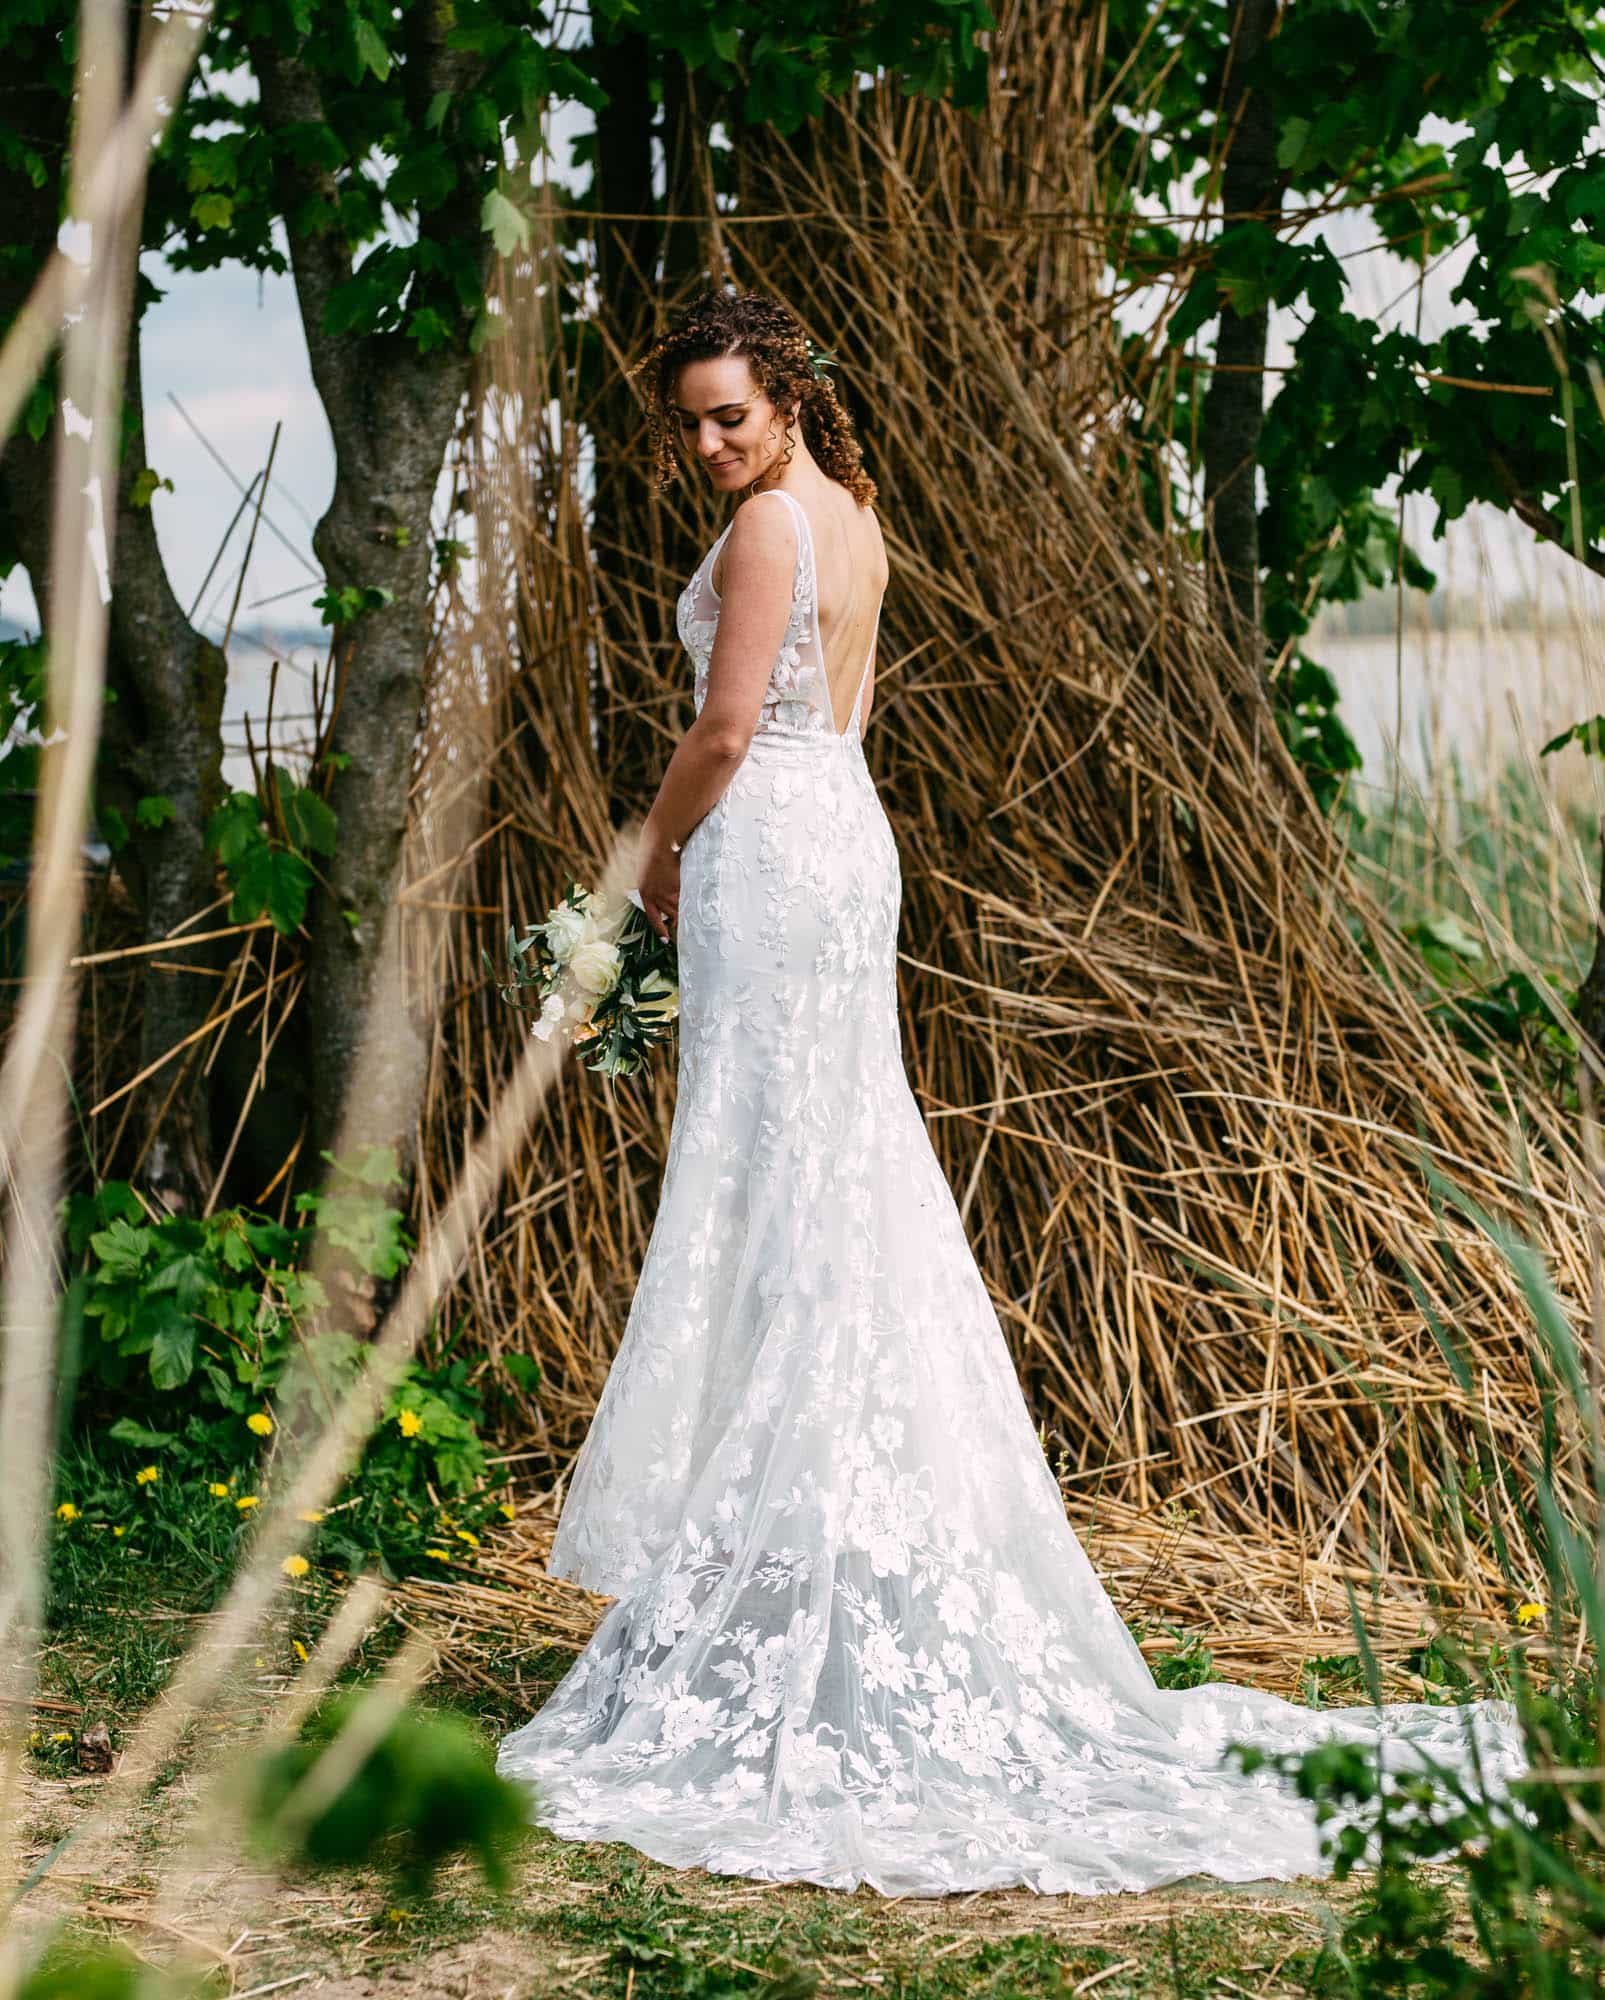 A Bohemian bride in a lace wedding dress standing in the grass.